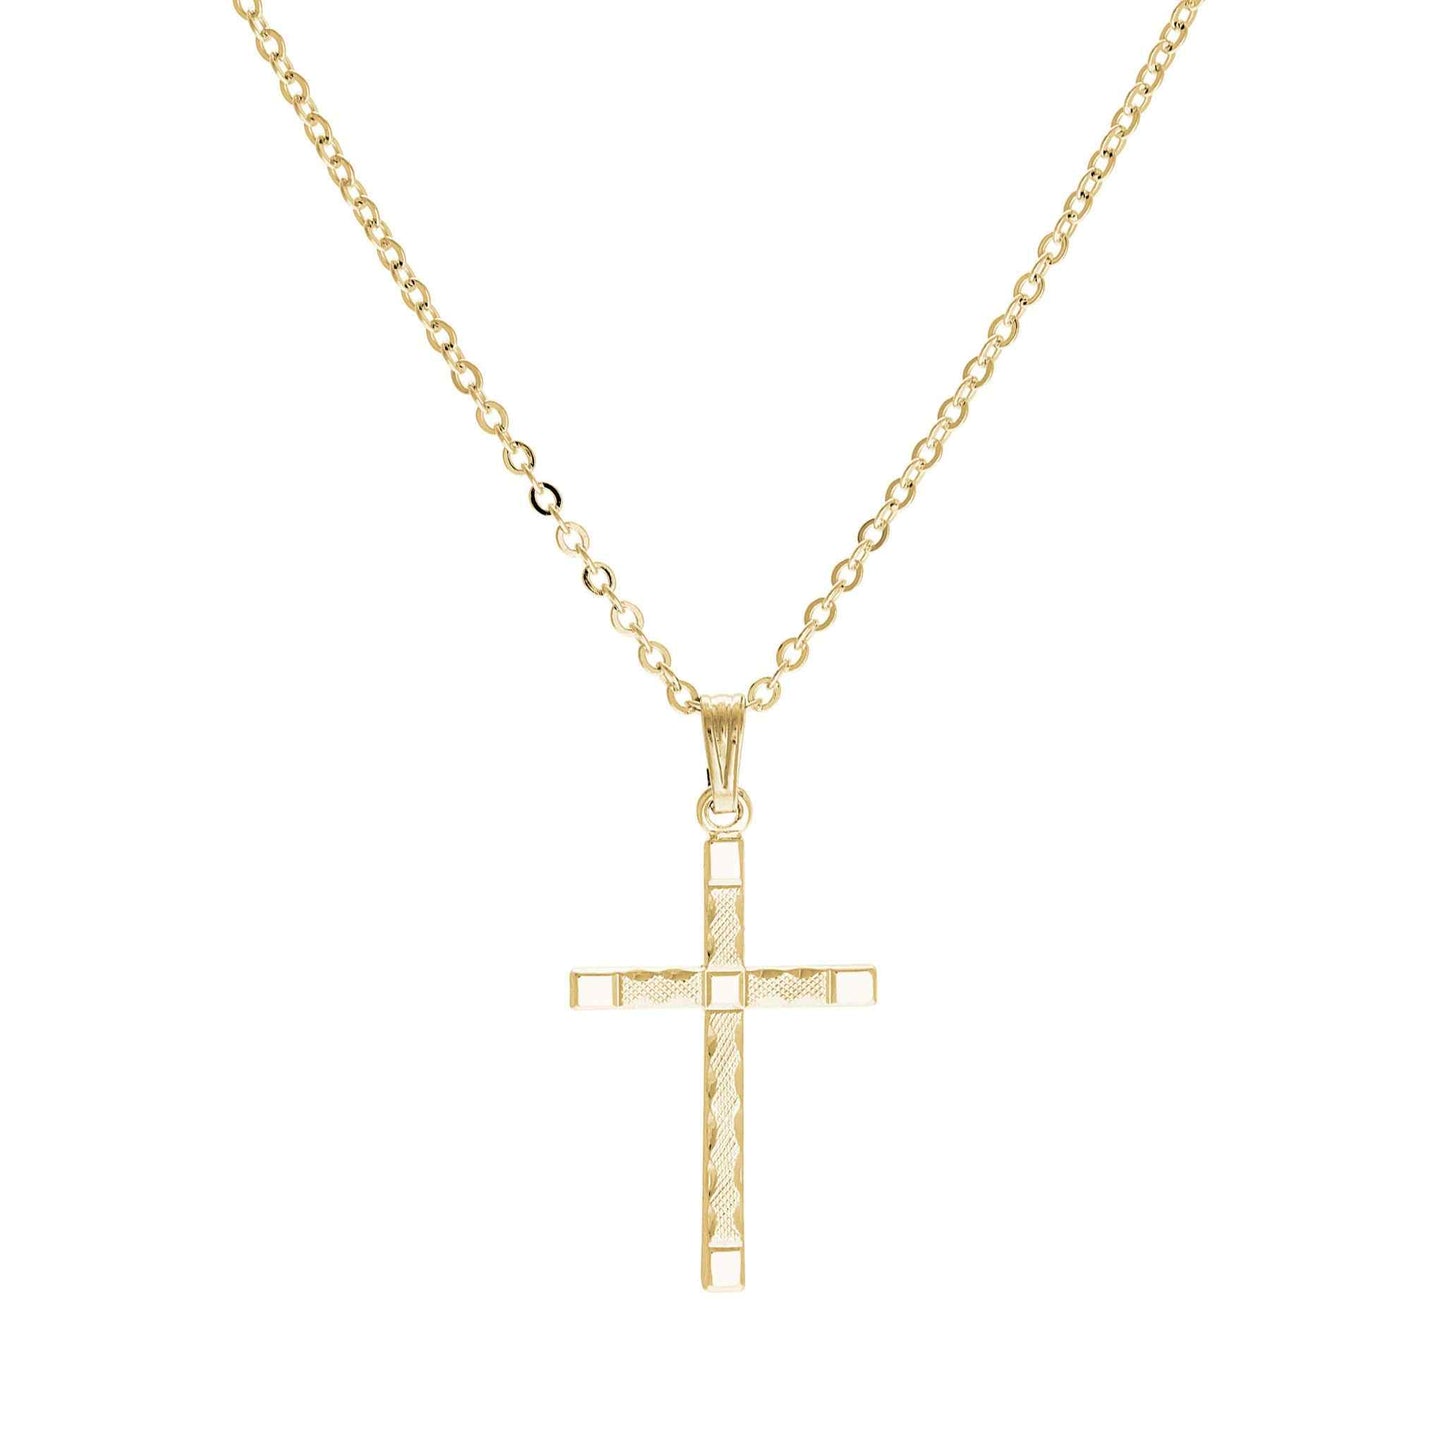 A texured medium cross displayed on a neutral white background.